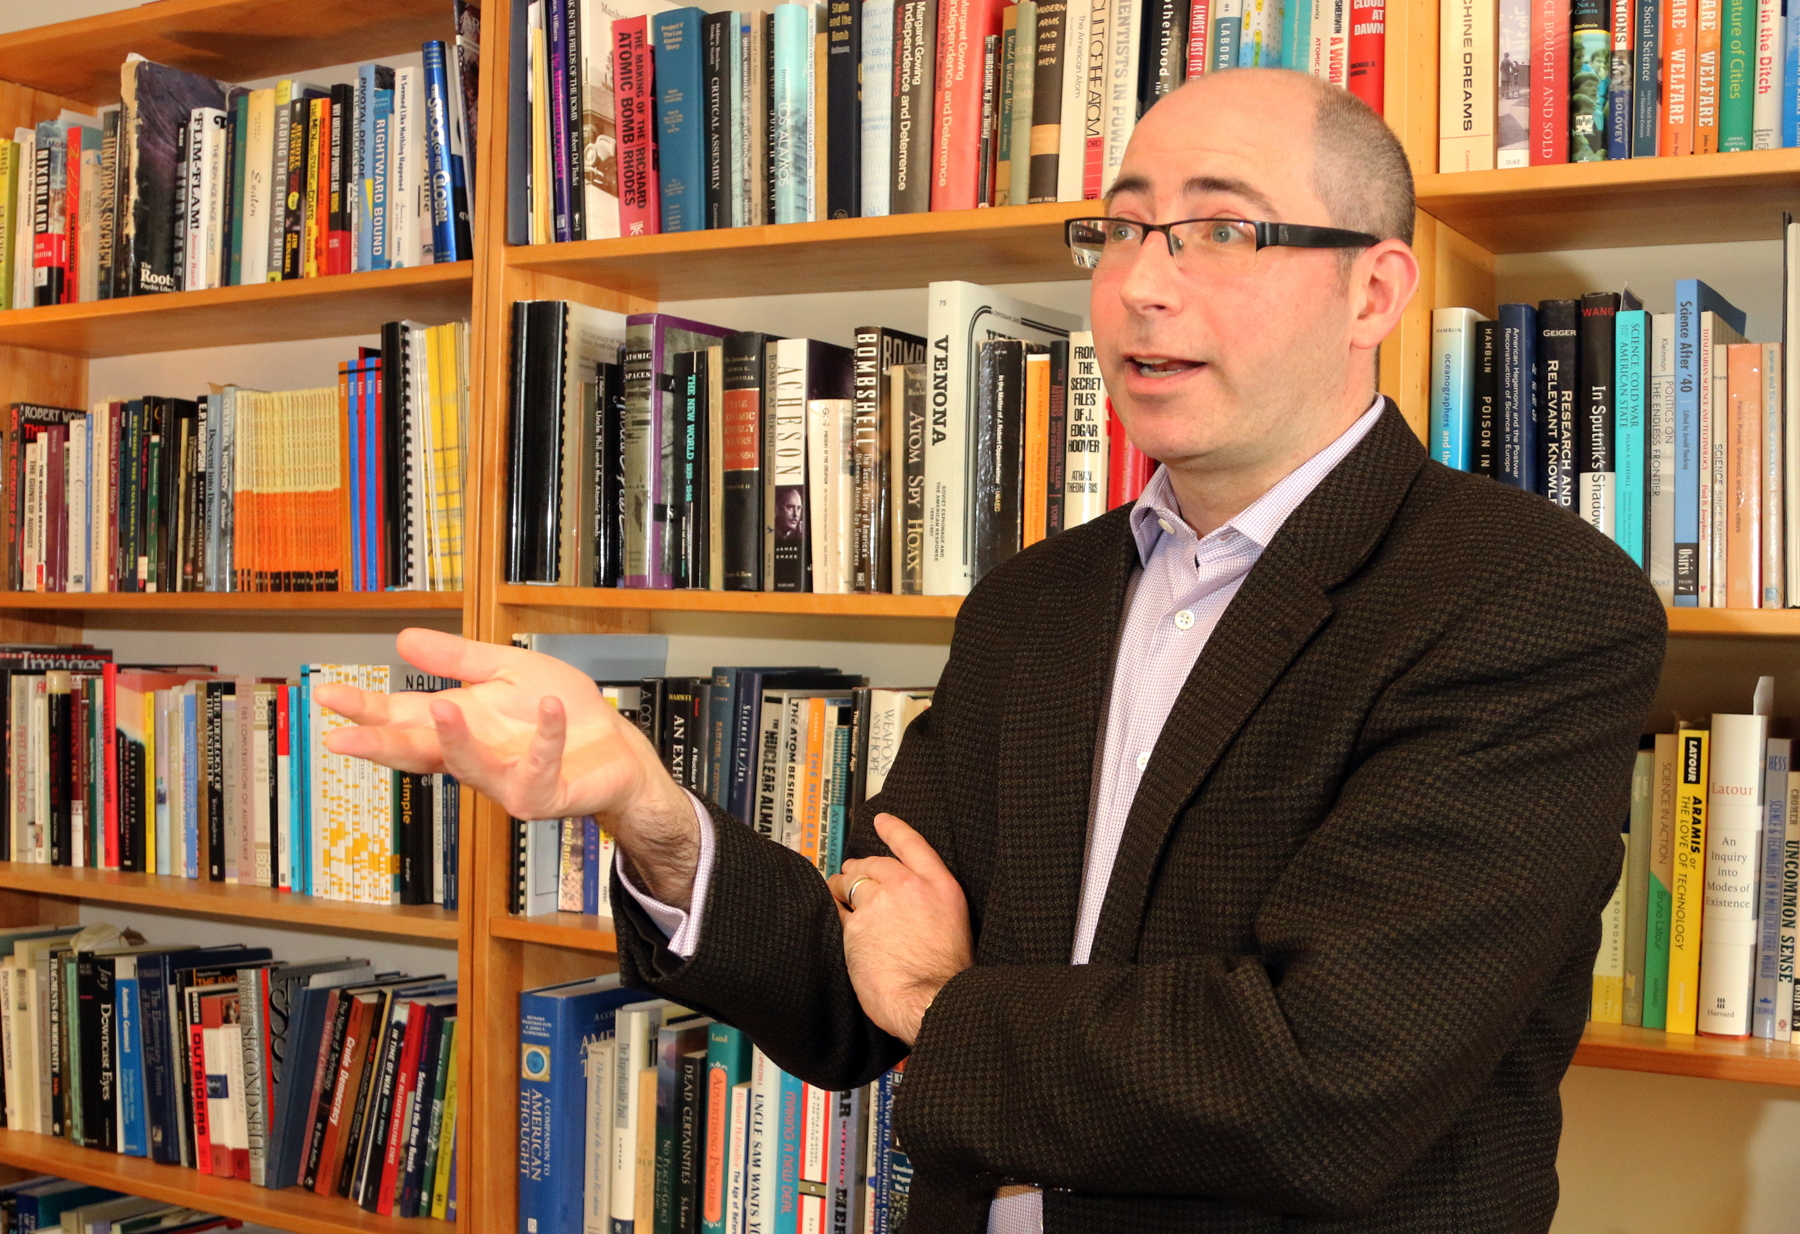 David Kaiser stands in front of a shelf of books